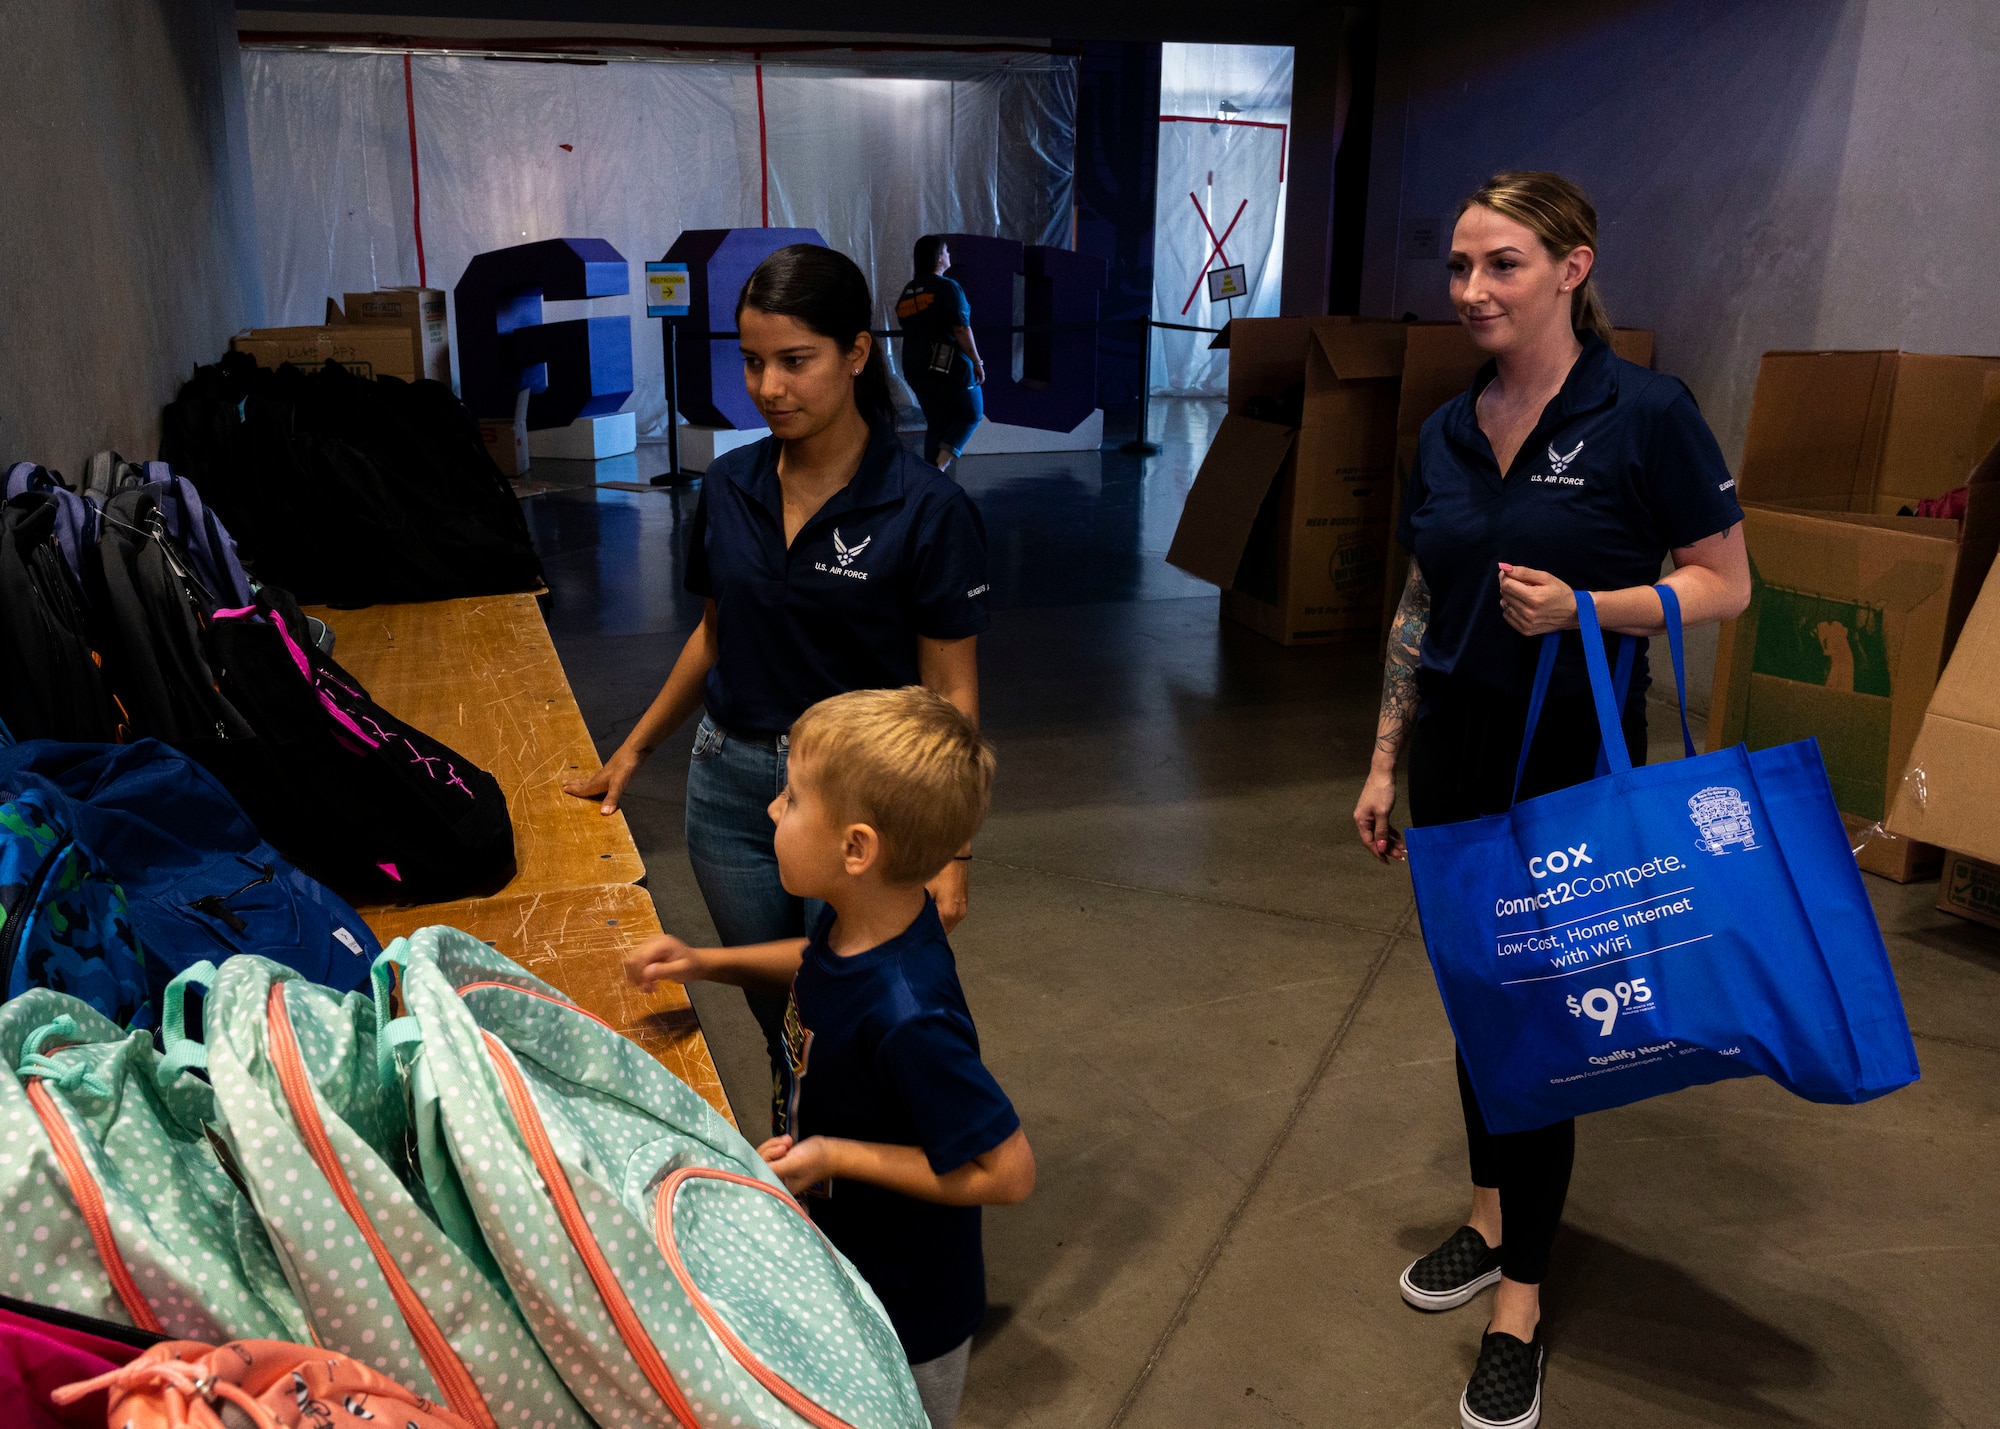 U.S. Air Force Airman 1st Class Alexis Lopez, 56th Fighter Wing religious affairs, and Senior Airman Jamie Samuels, 56th FW religious affairs, help a boy pick out his backpack for school at the Back to School Bash event July 20, 2022, at Grand Canyon University, Phoenix, Arizona.